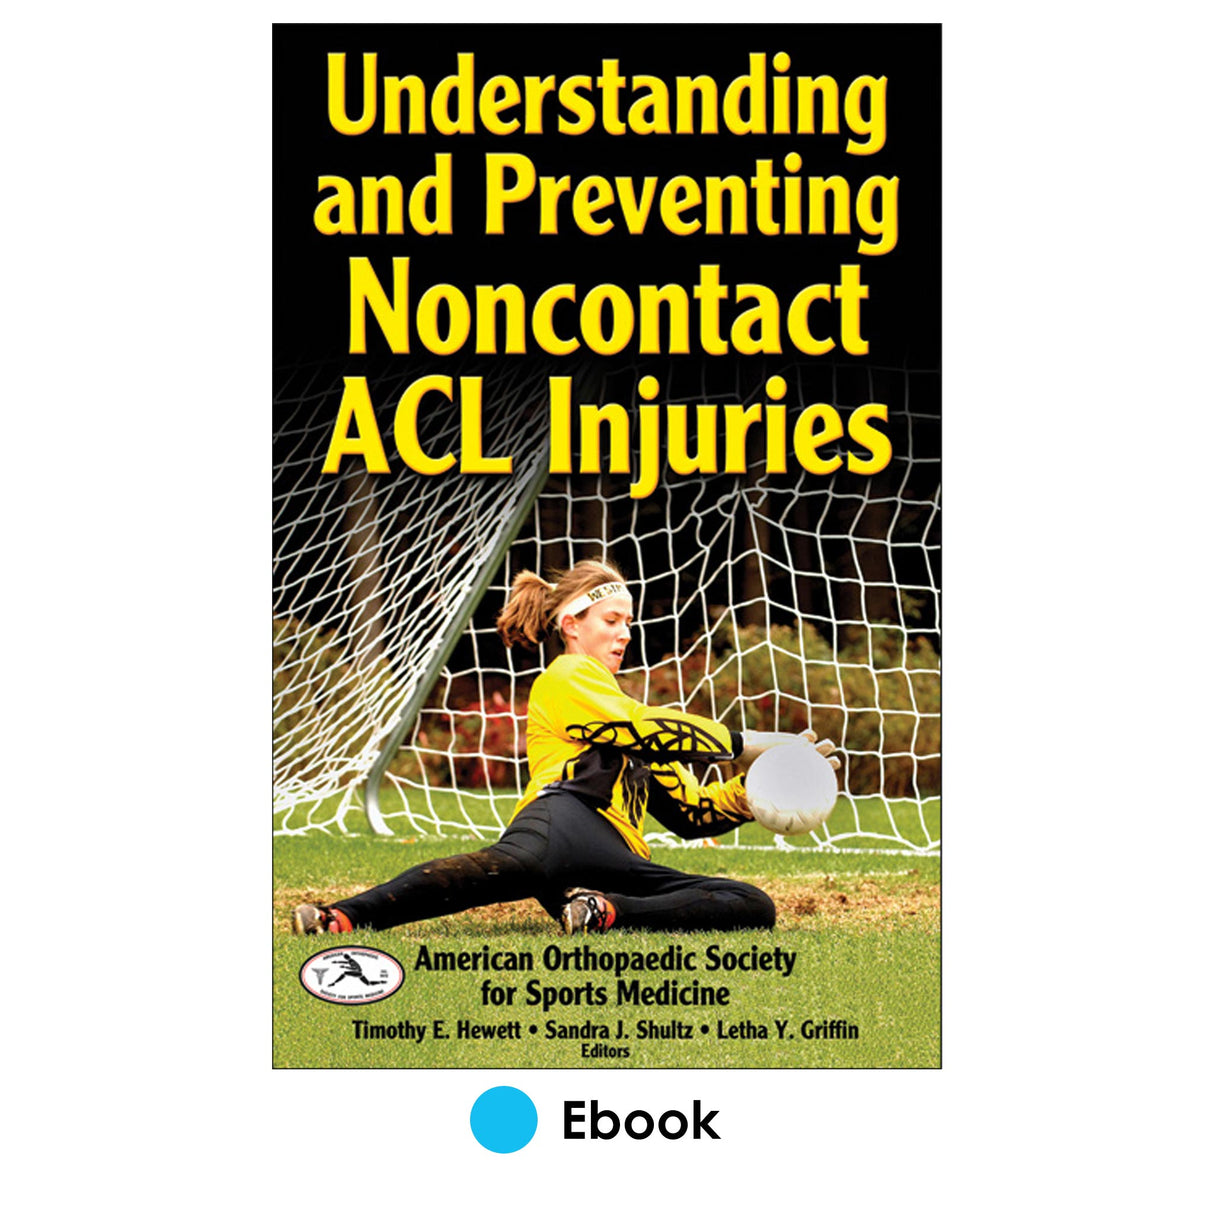 Understanding and Preventing Noncontact ACL Injuries PDF